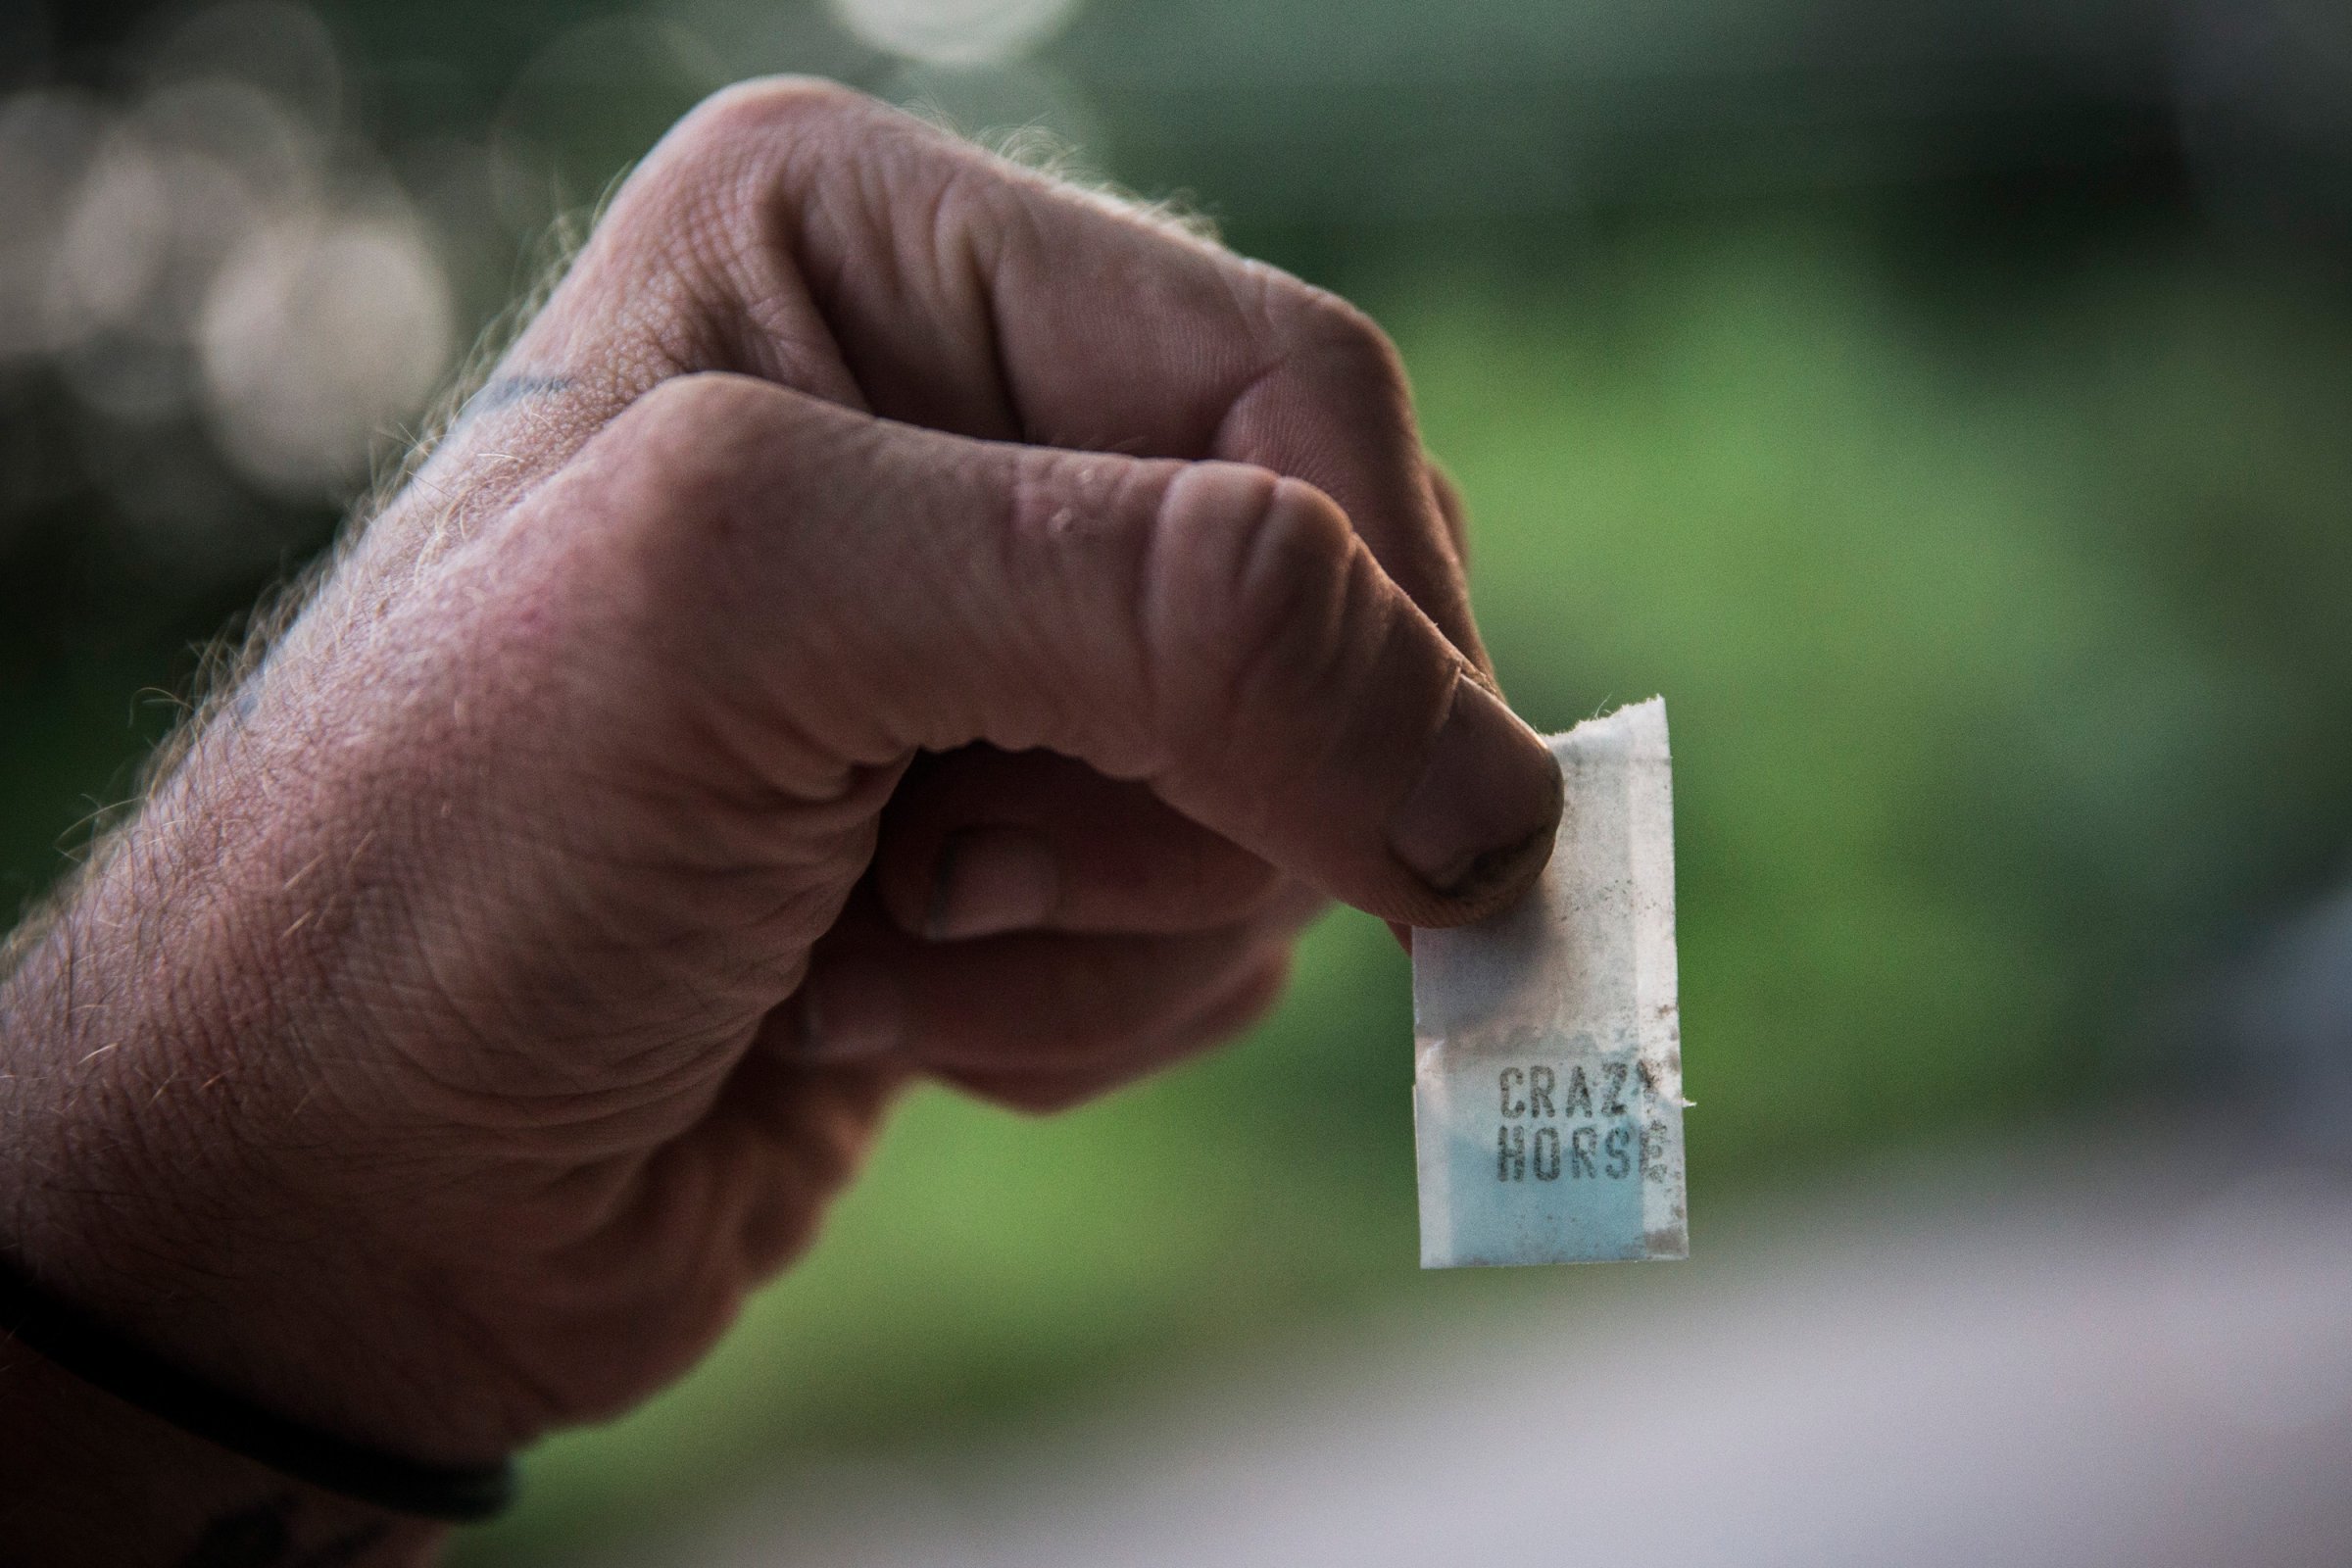 A man holds a bag of heroin labeled "Crazy Horse" in Camden, N.J., Aug. 21, 2013.